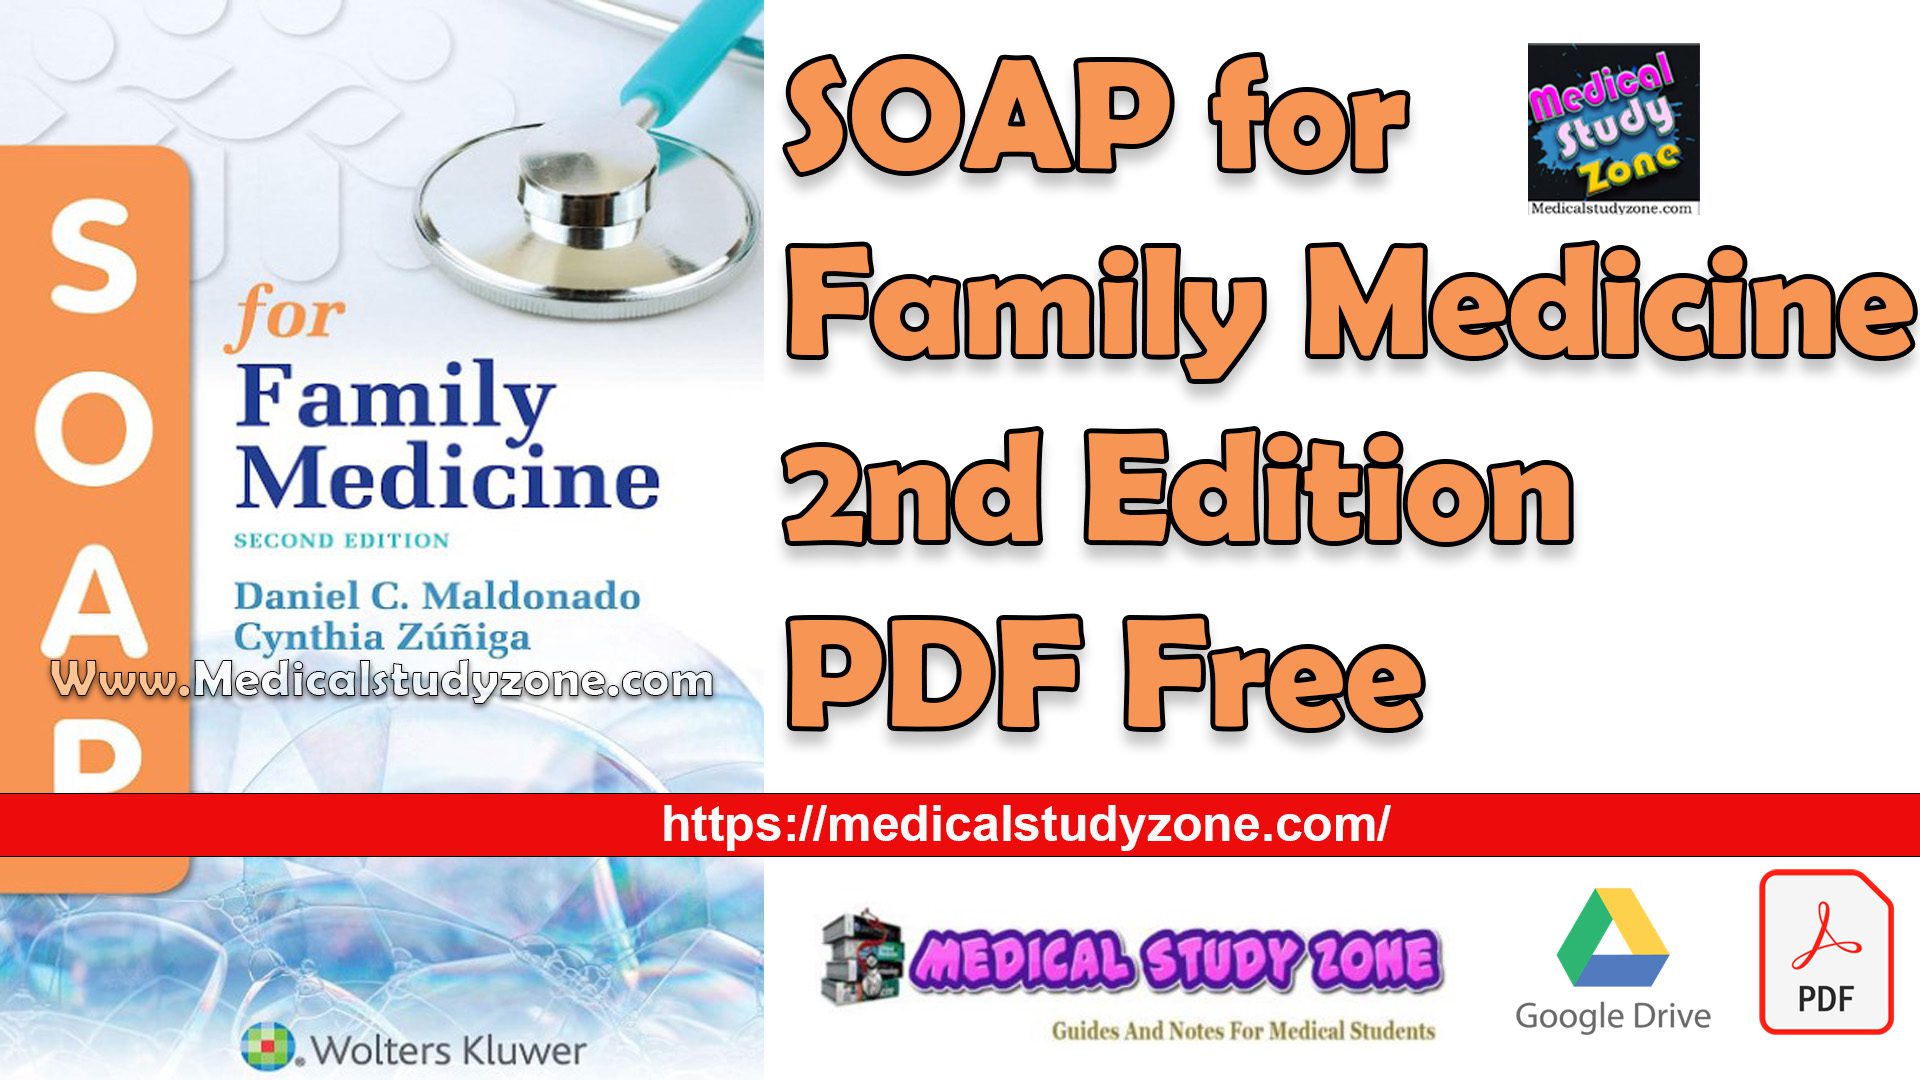 SOAP for Family Medicine 2nd Edition PDF Free Download